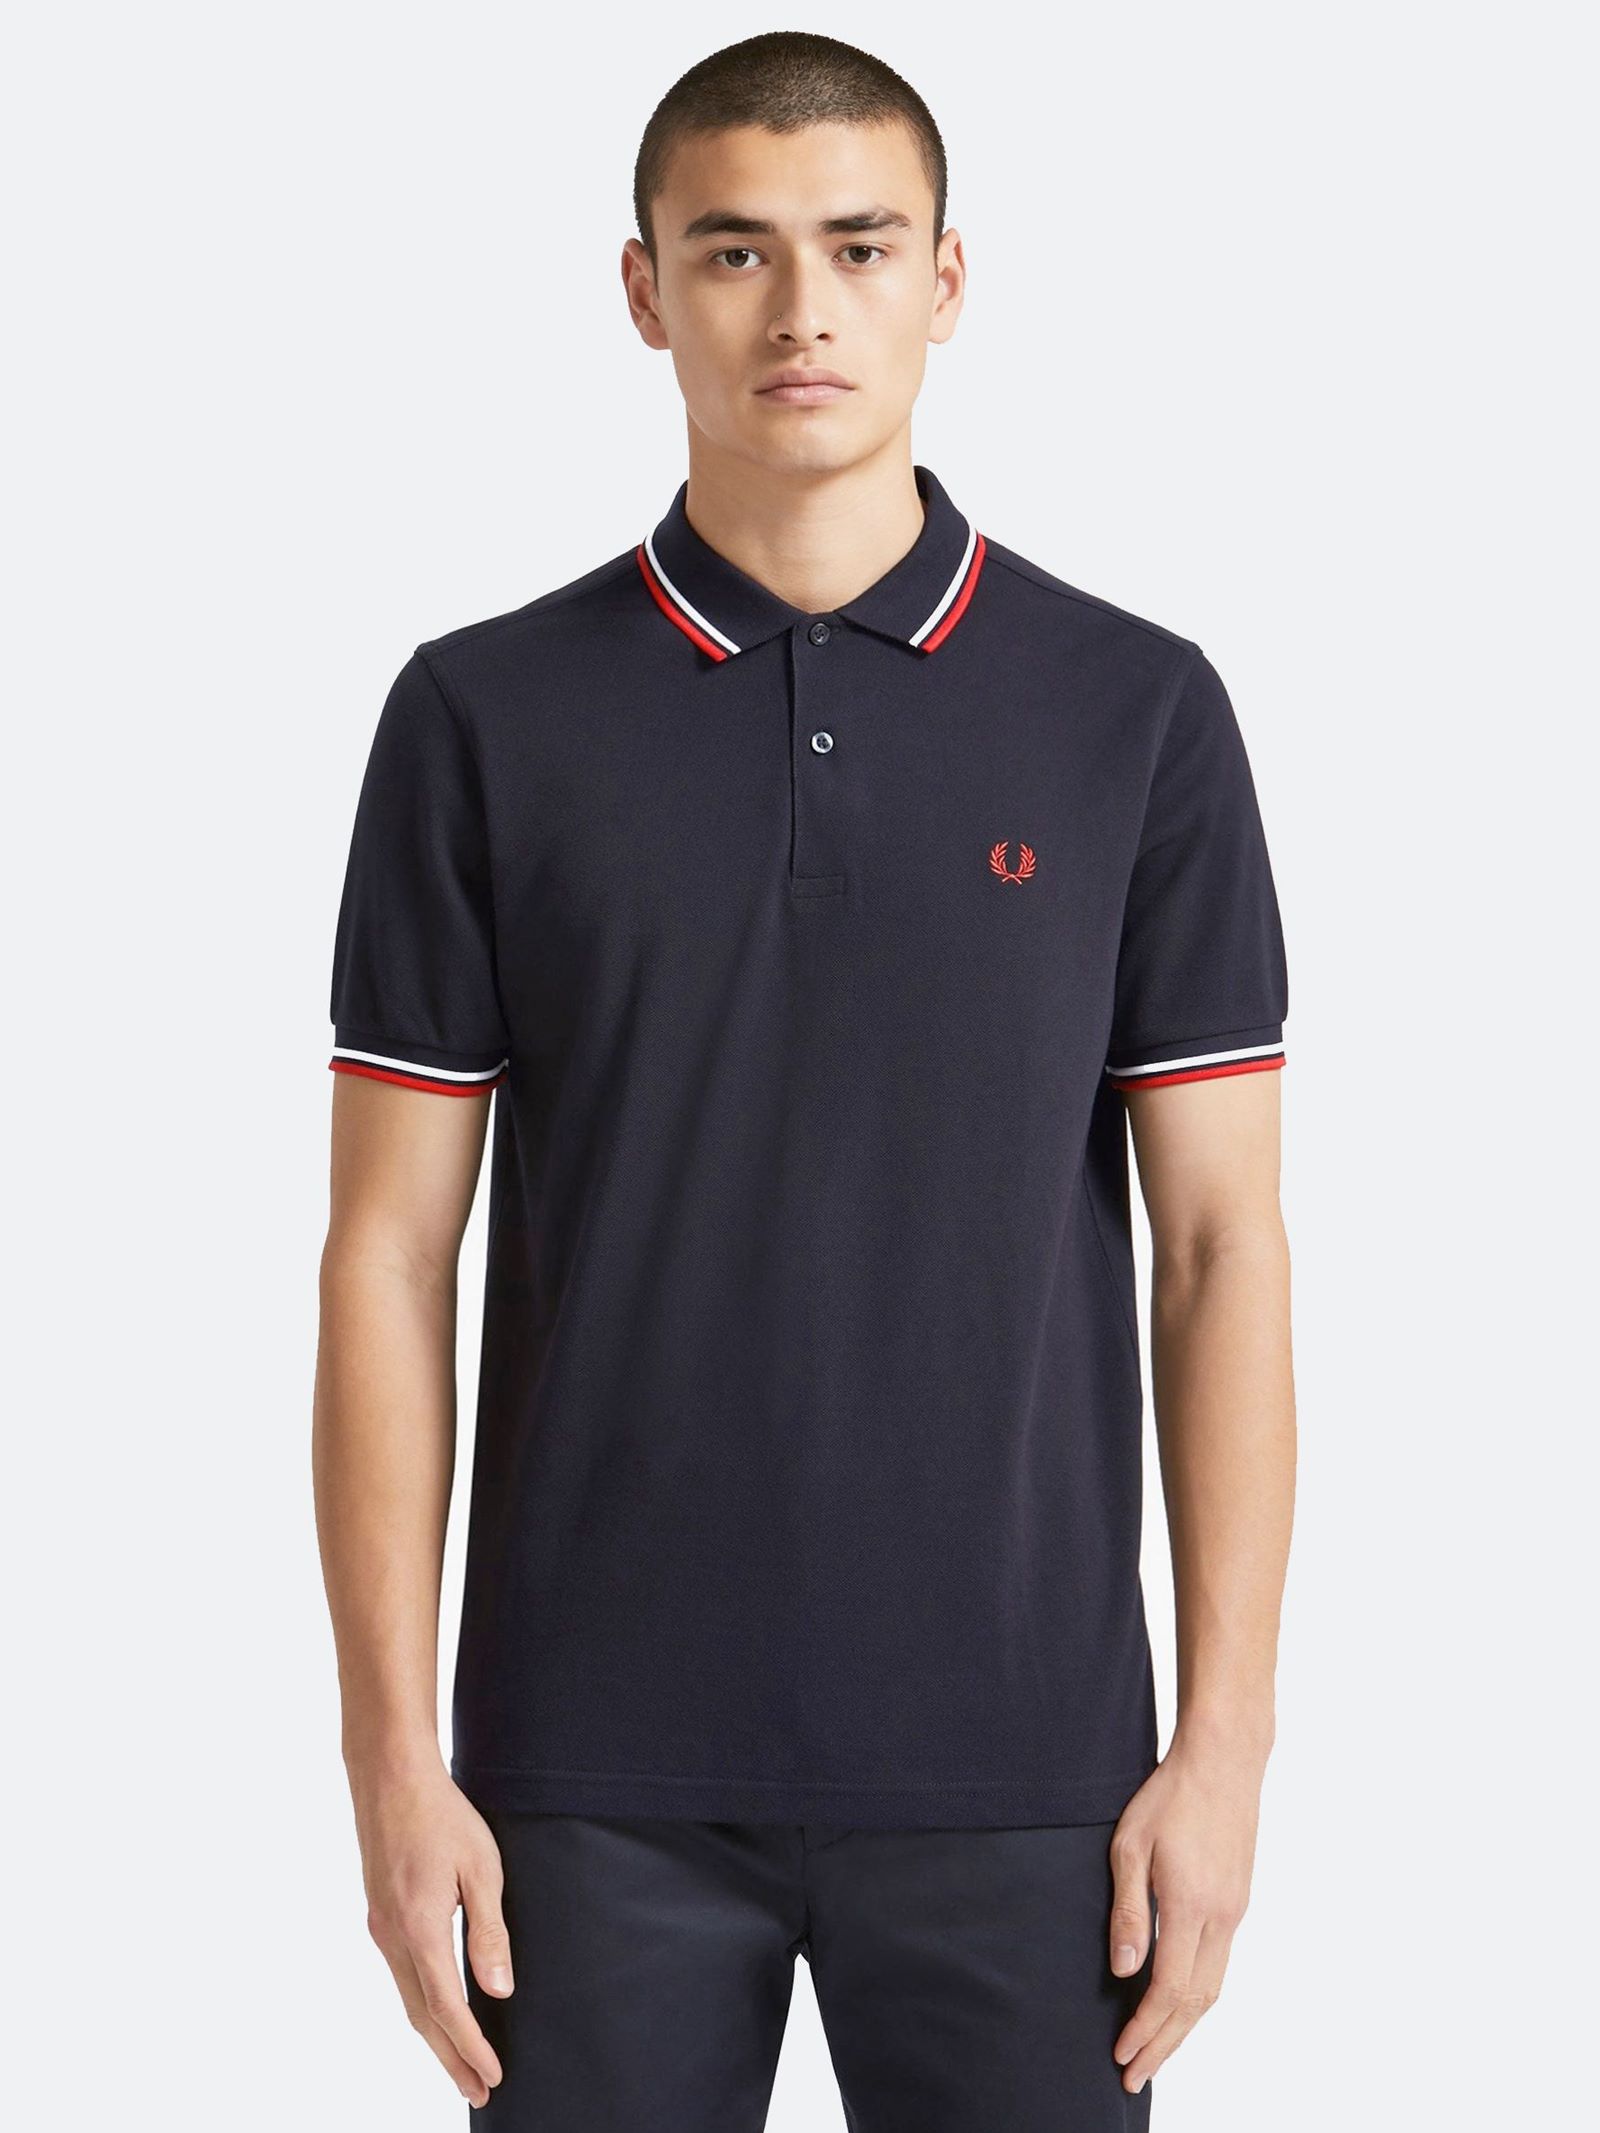 Fred Perry Men's Twin Tipped Polo in Navy / White / Red | Dapper Street